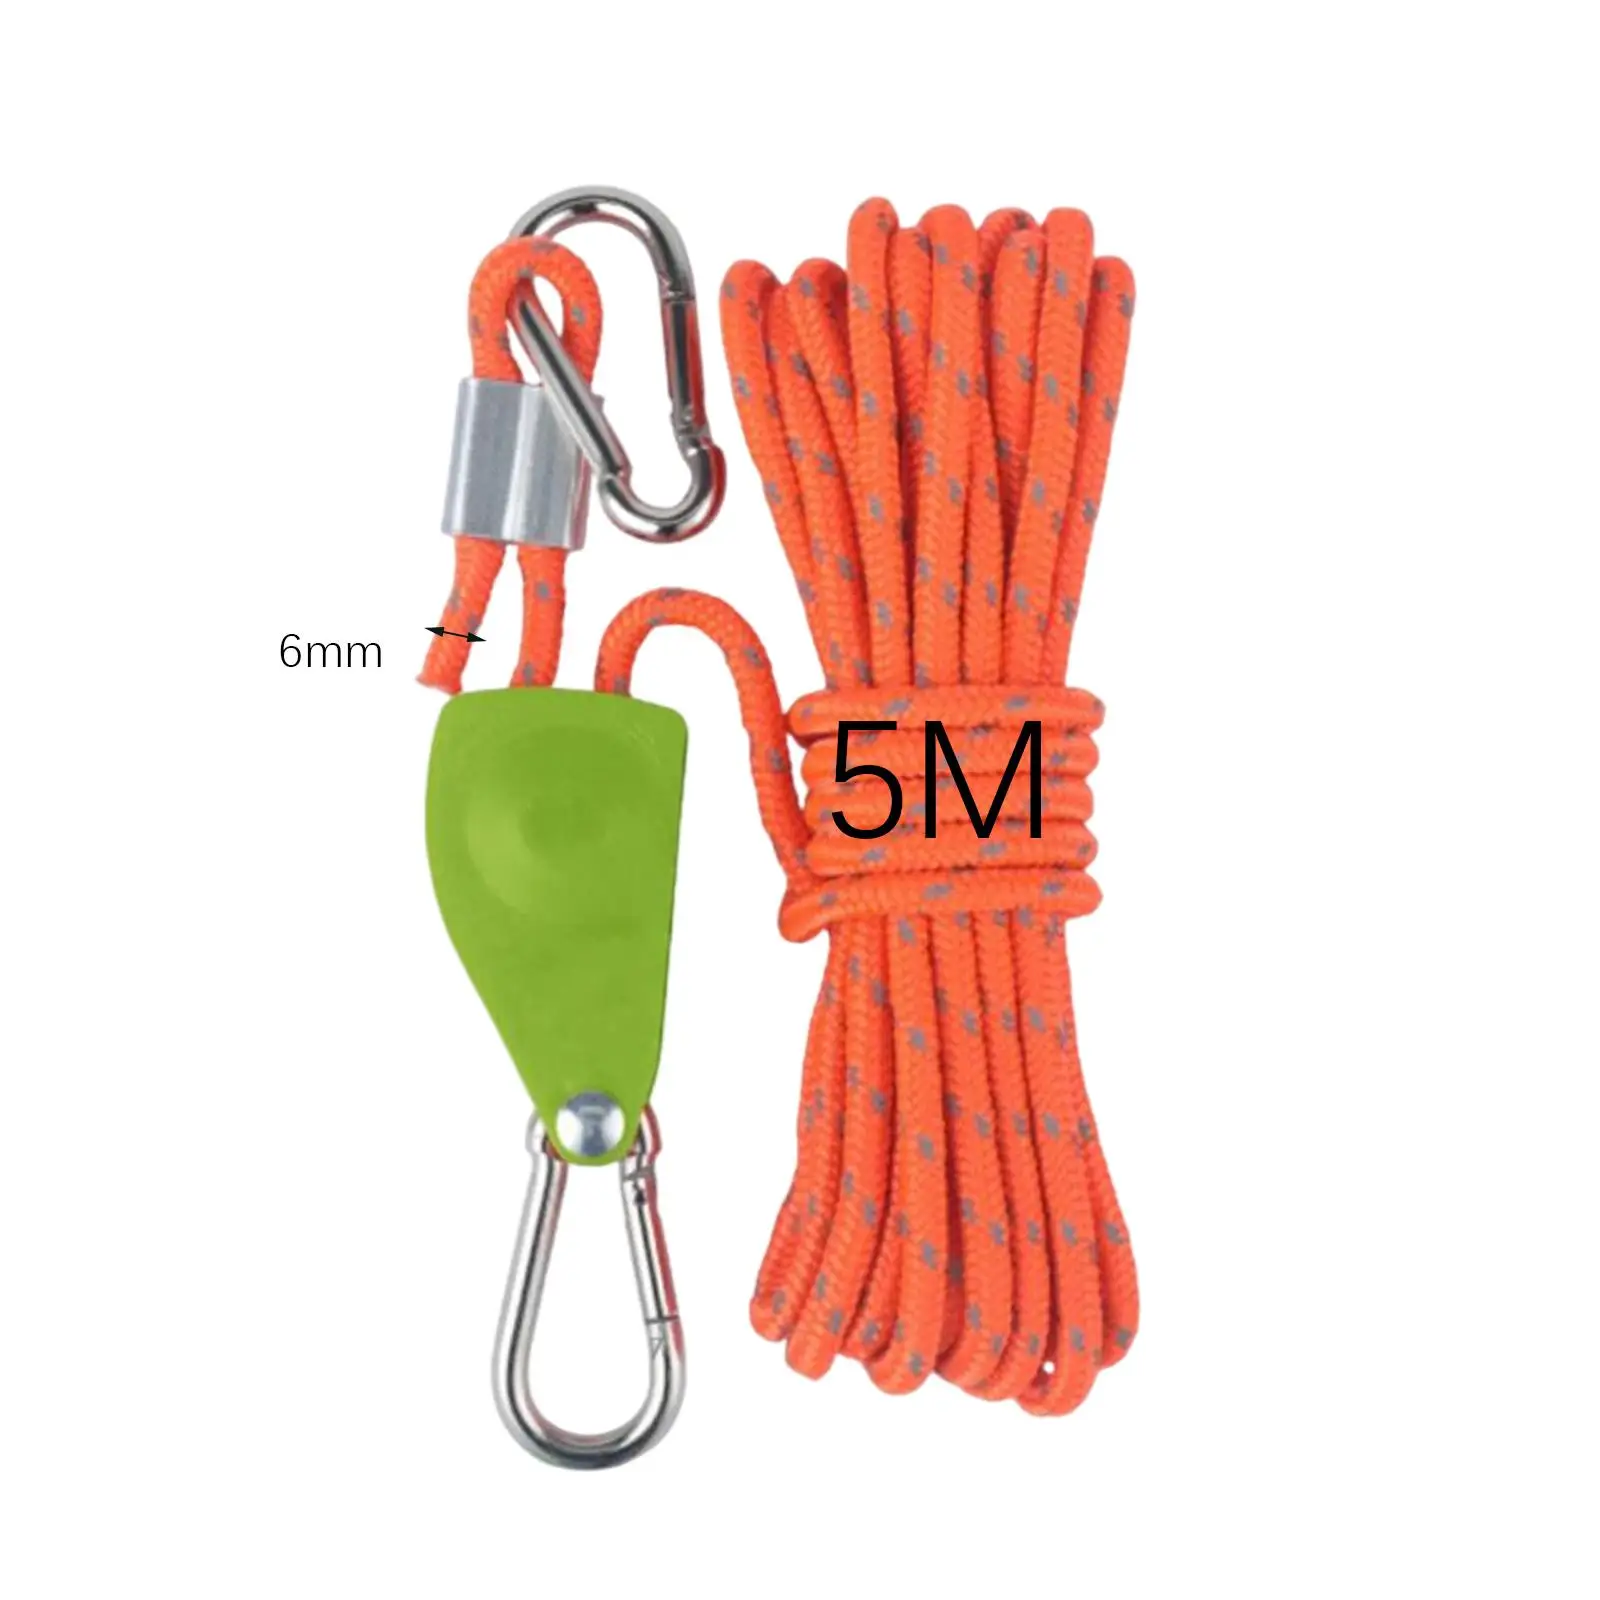 Outdoor Camping Tent Rope w/ Ratchet Pulley Tent Guy Ropes Kayak Camping Rope Cord Guy Lines Adjuster for Tarp Canopy Shelter